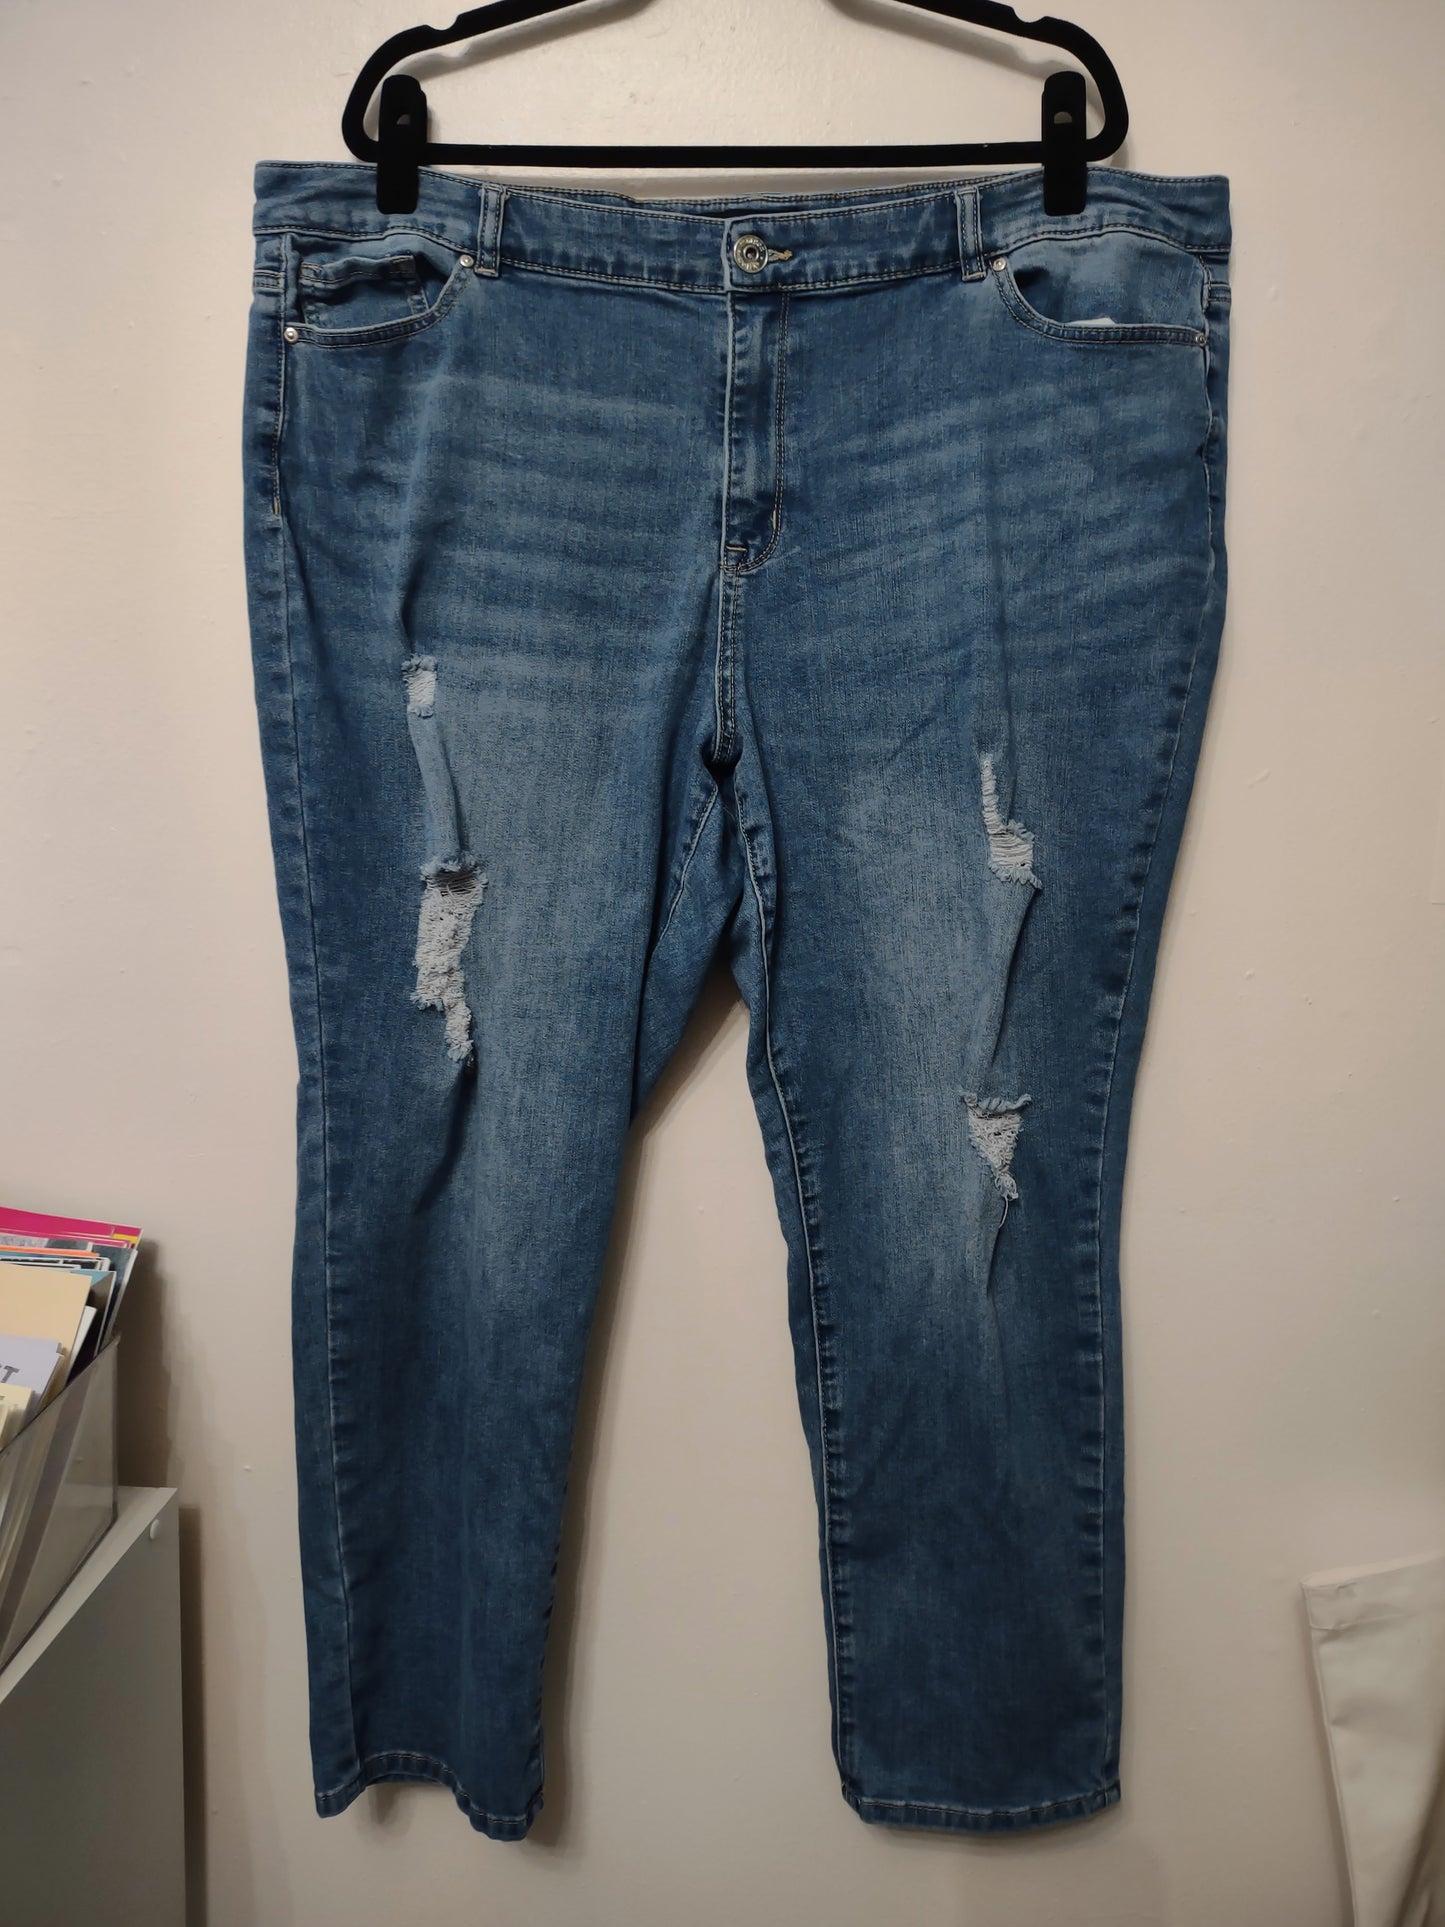 Distressed Jeans Size 22